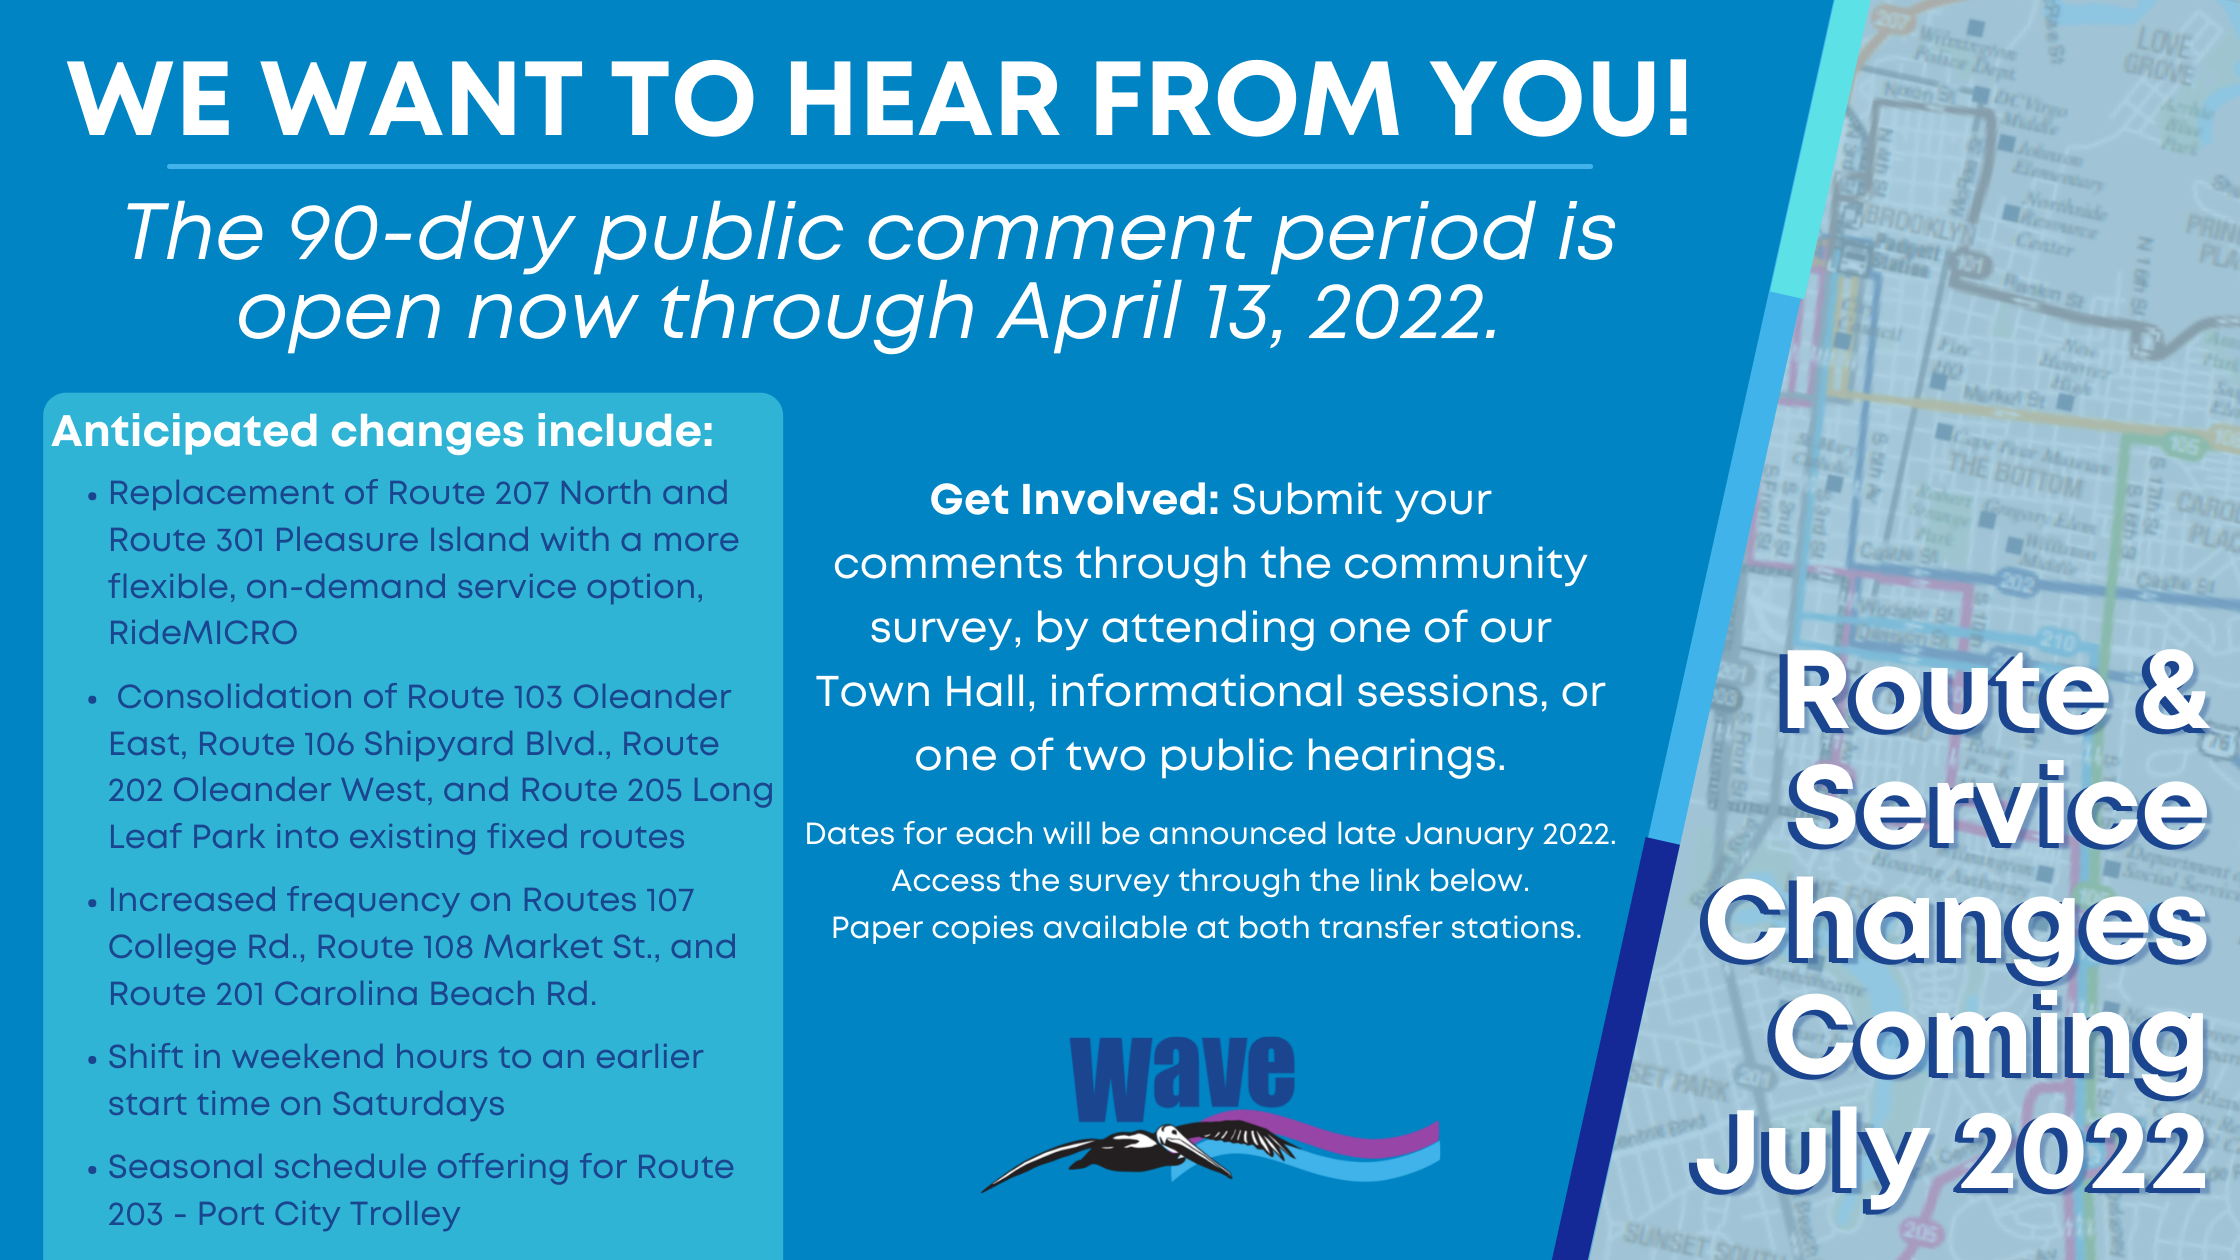 Route & Service Changes Coming July 2022: We want to hear from you! The 90-day public comment period is open now through April 13, 2022. Anticipated changes include: Replacement of Route 207 North and Route 301 Pleasure Island with a more flexible, on-demand service option, RideMICRO Consolidation of Route 103 Oleander East, Route 106 Shipyard Blvd., Route 202 Oleander West, and Route 205 Long Leaf Park into existing fixed routes Increased frequency on Routes 107 College Rd., Route 108 Market St., and Route 201 Carolina Beach Rd. Shift in weekend hours to an earlier start time on Saturdays Seasonal schedule offering for Route 203 - Port City Trolley. Get Involved: Submit your comments through the community survey, by attending one of our Town Hall, informational sessions, or one of two public hearings. Dates for each will be announced late January 2022. Access the survey through the link below. Paper copies available at both transfer stations.